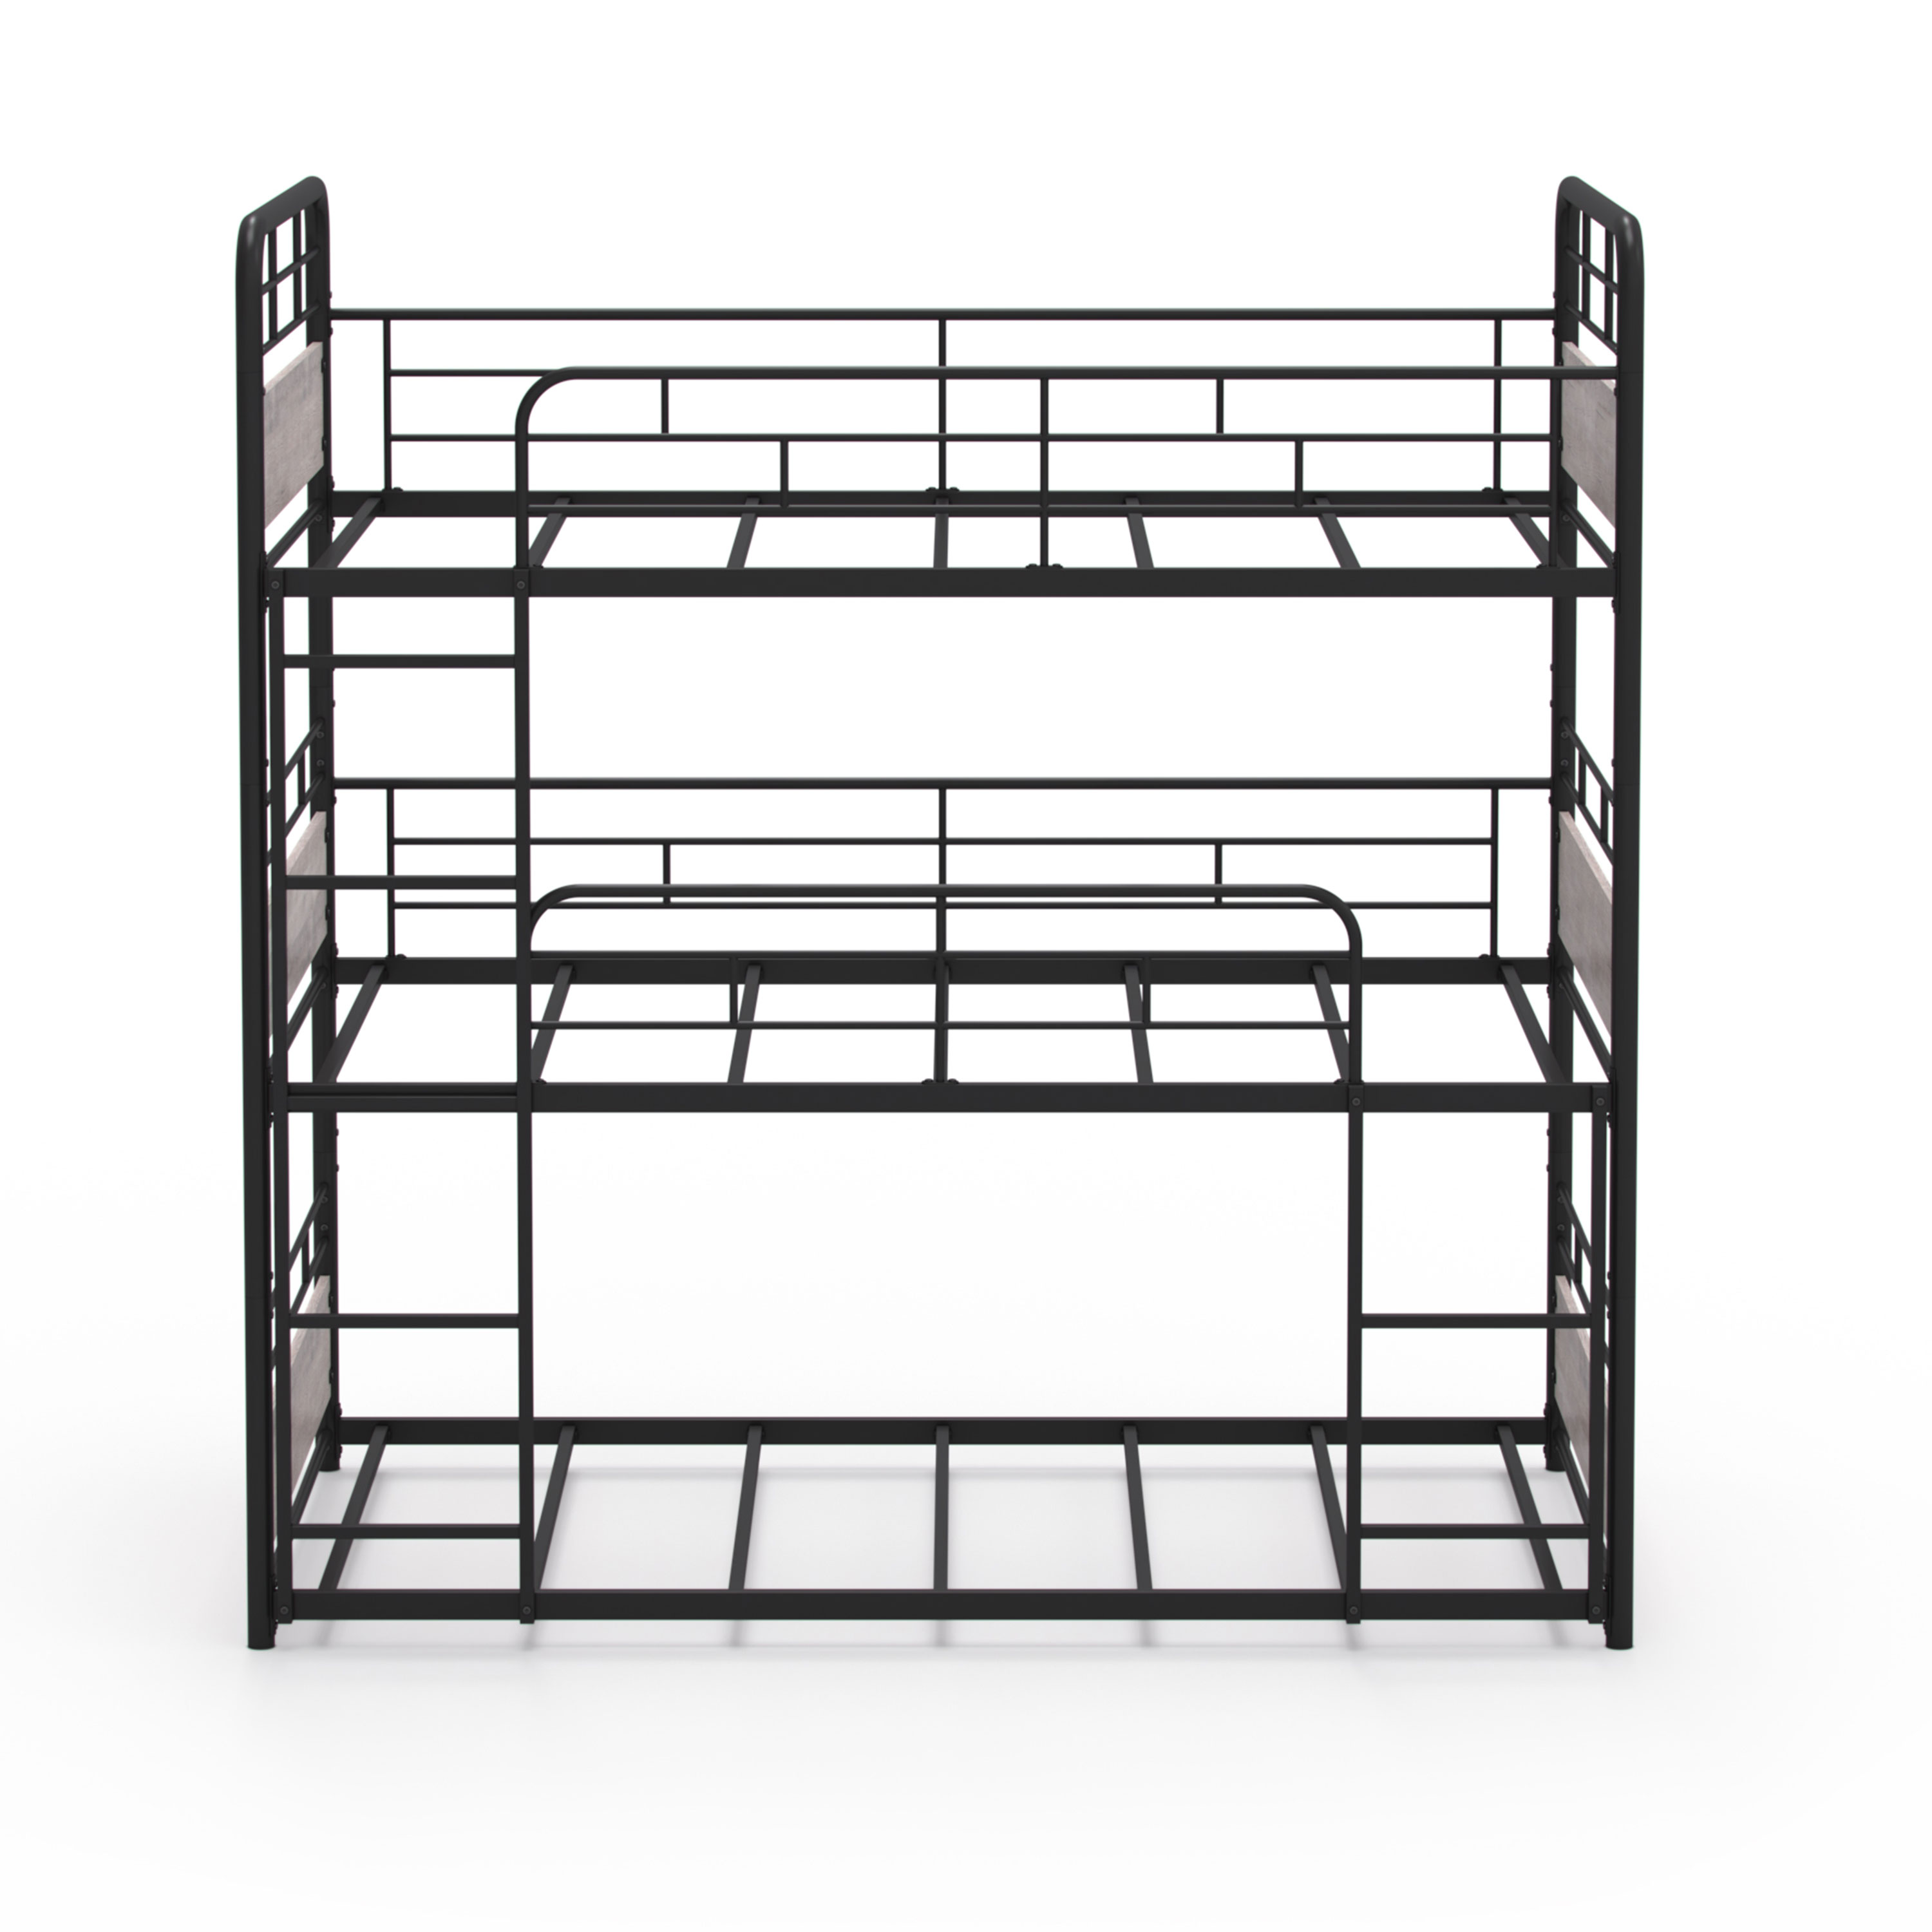 Better Homes & Gardens Anniston Convertible Black Metal Triple Twin Bunk Bed, Gray Wood Accents - image 25 of 26